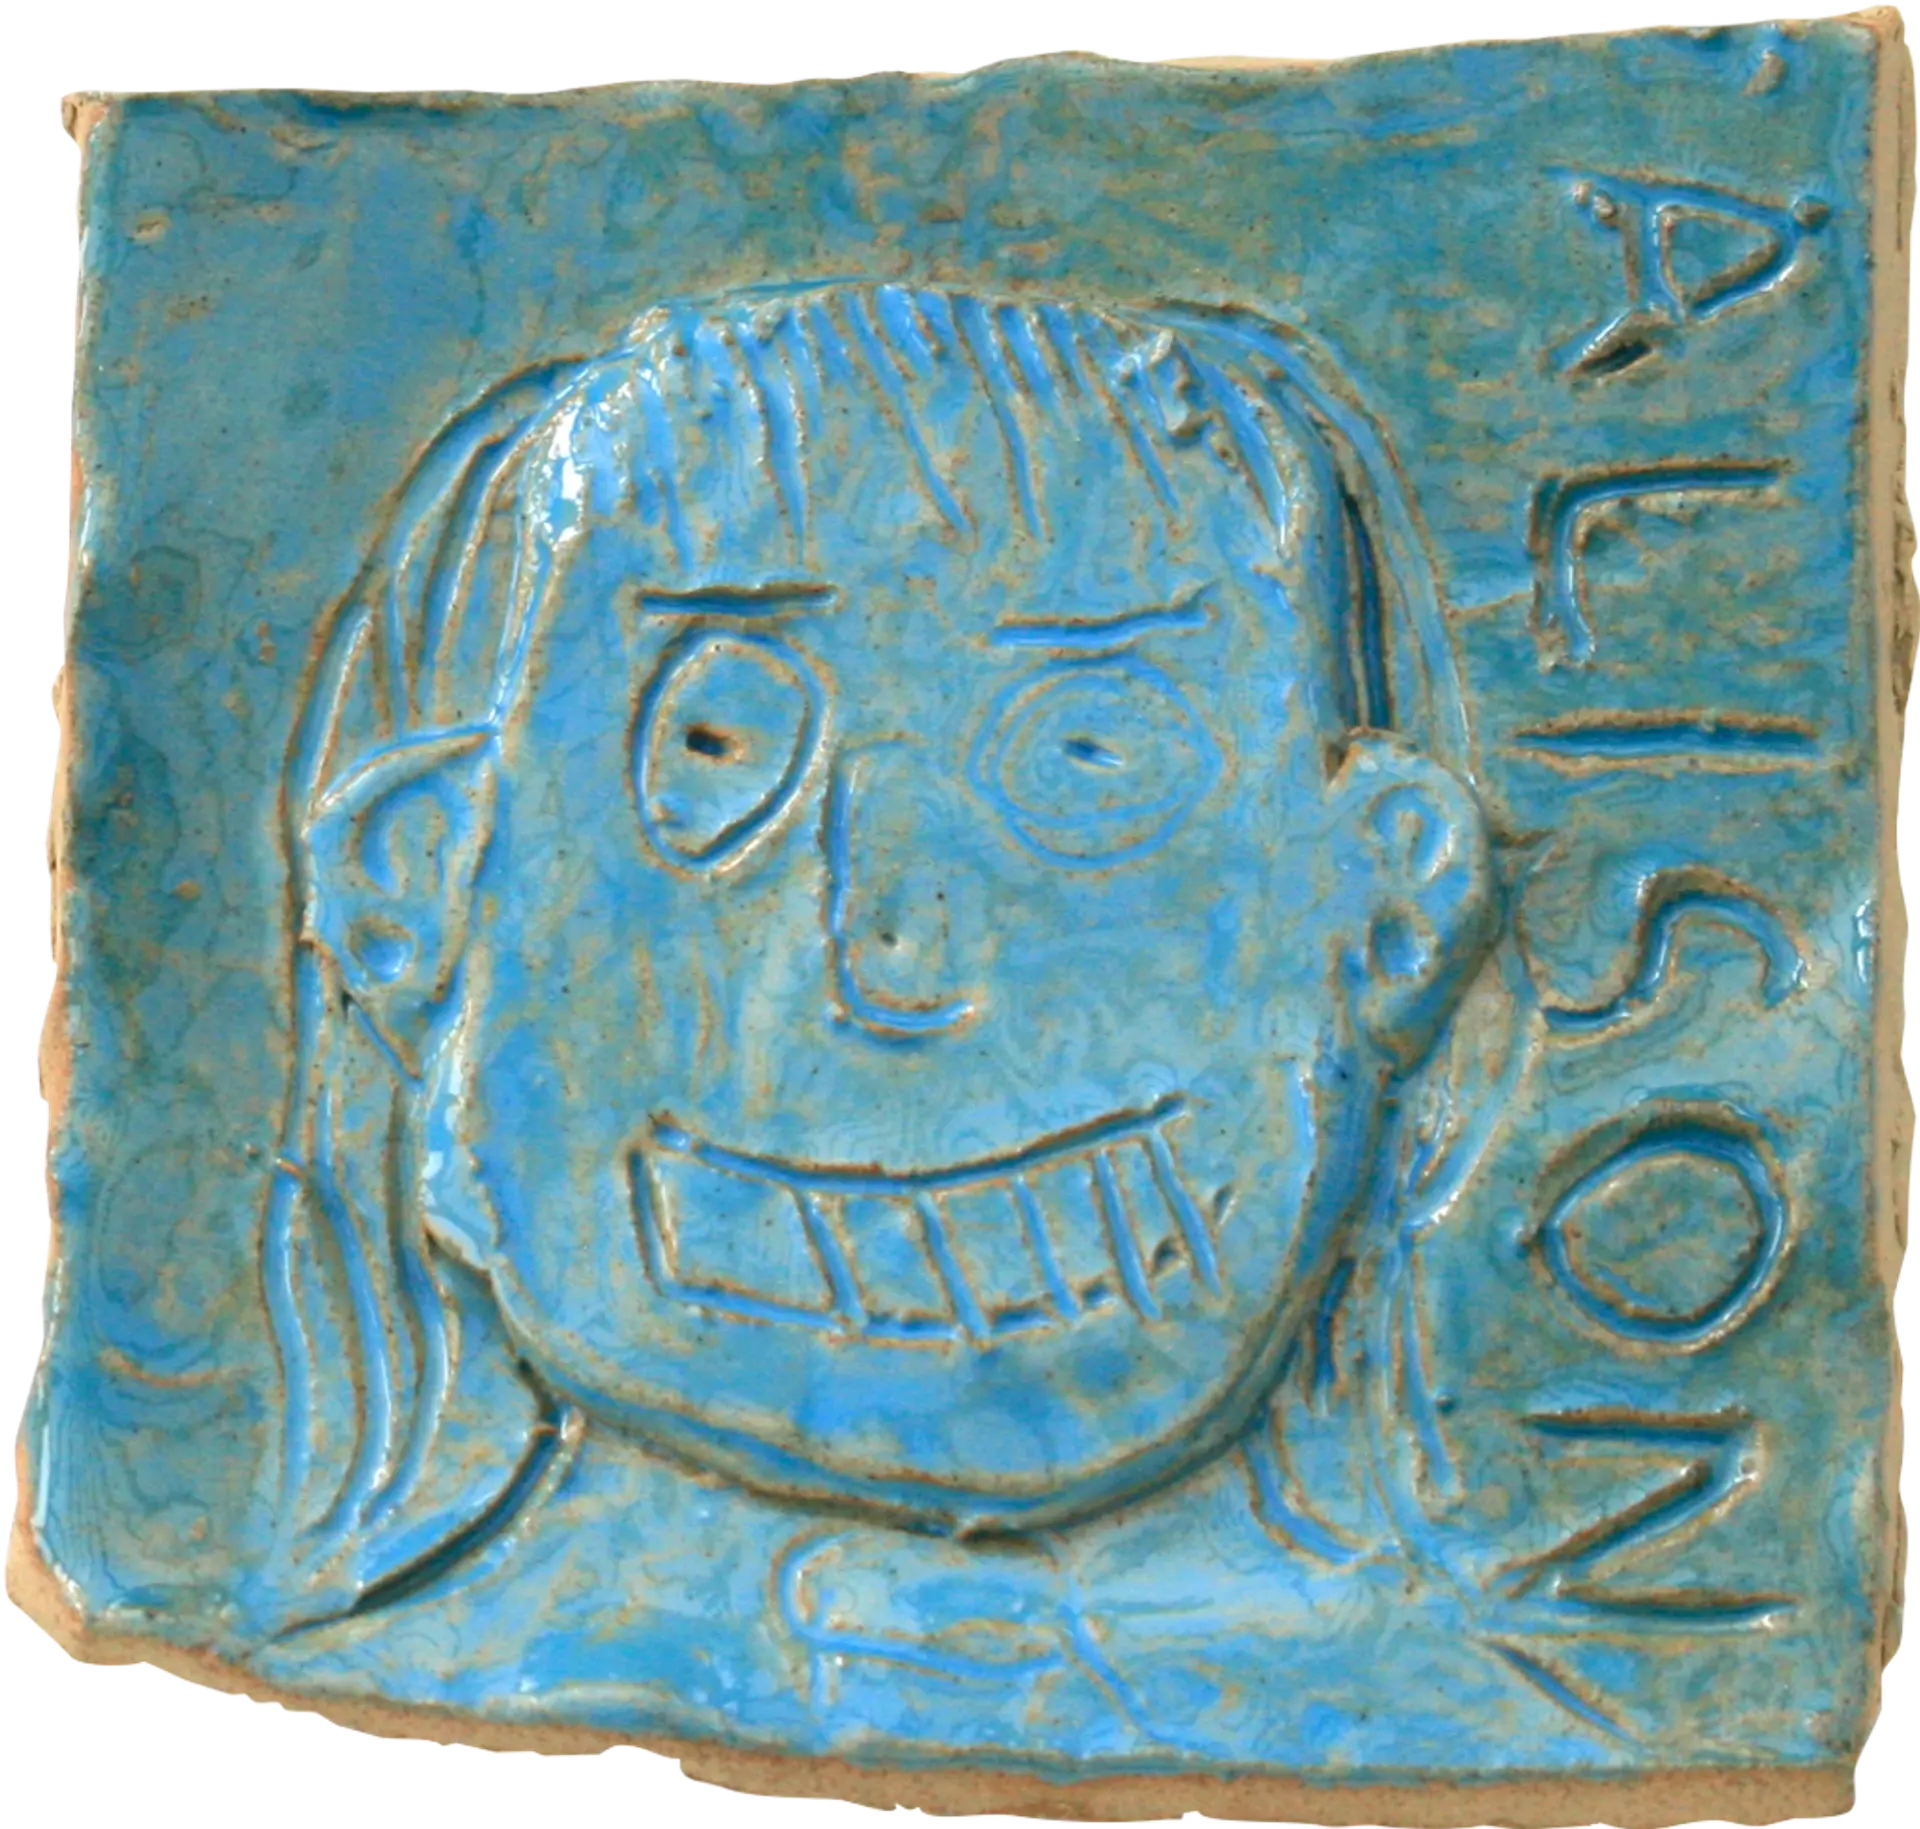 A blue glazed ceramic tile of Alison, a member of the Montrose group's mum. Her name is written down the right hand side of the tile. She is smiling. 